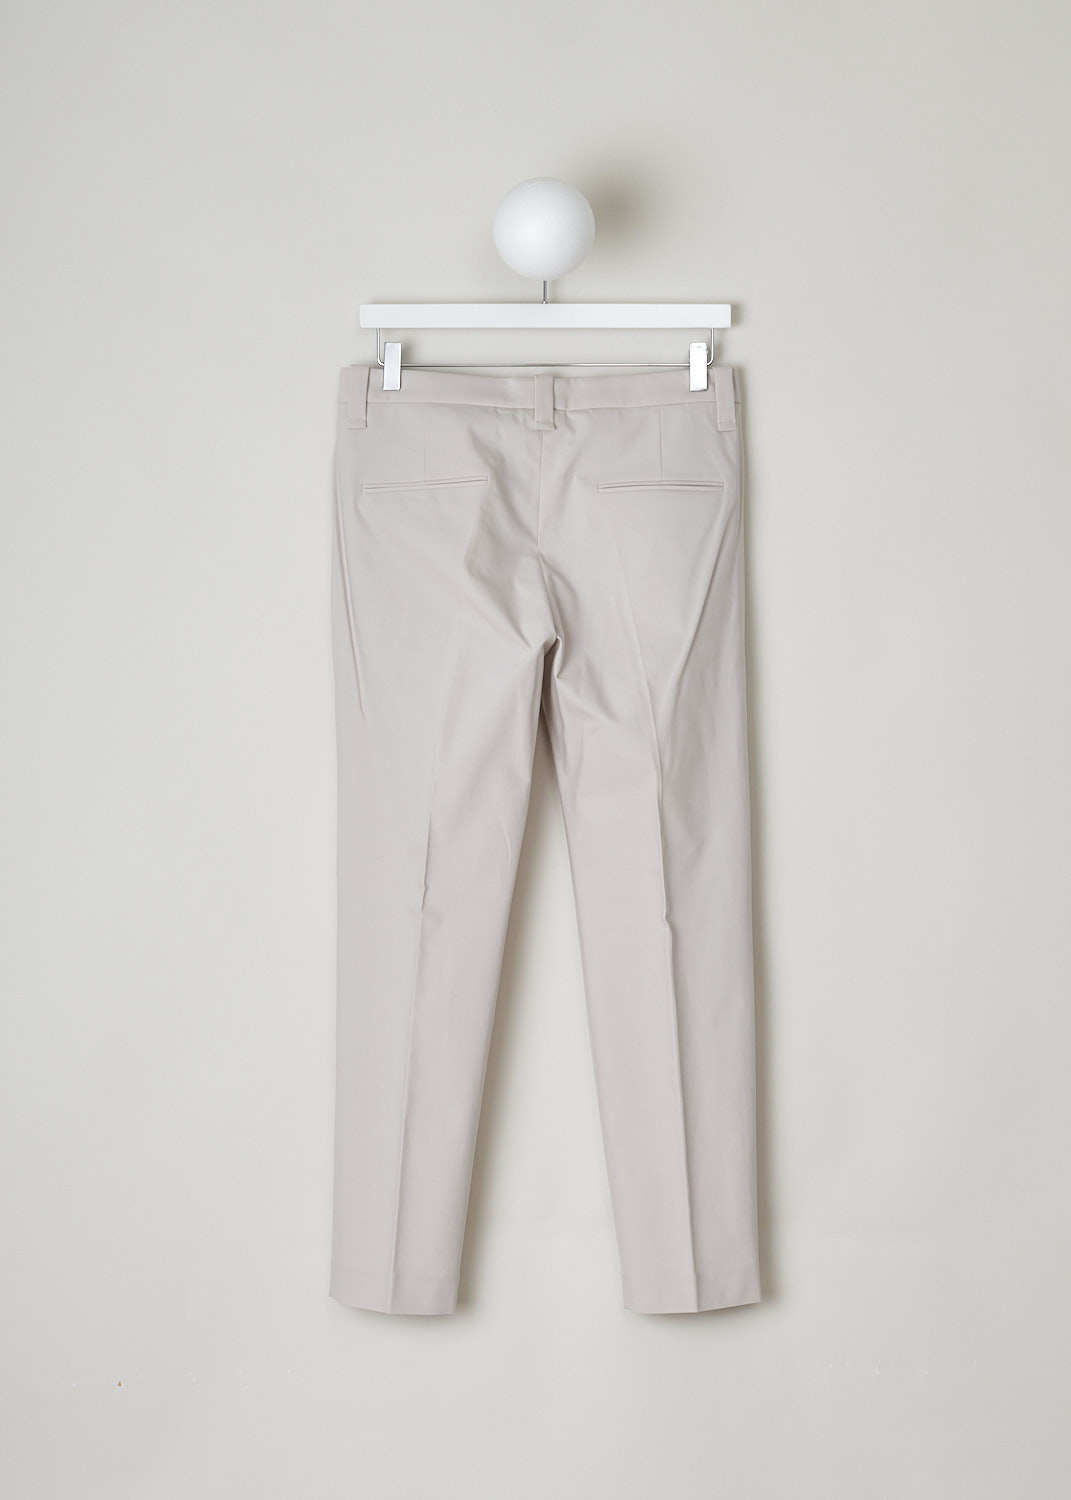 BRUNELLO CUCINELLI, BEIGE MID-RISE PANTS, M0F70P1995_C2837, Beige, Back, These beige mid-rise pants have a waistband with belt loops and a concealed clasp and zip closure. In the front, these pants have slanted pockets. In the back, two welt pocket can be found. Centre creases run along the length of the tapered leg.
